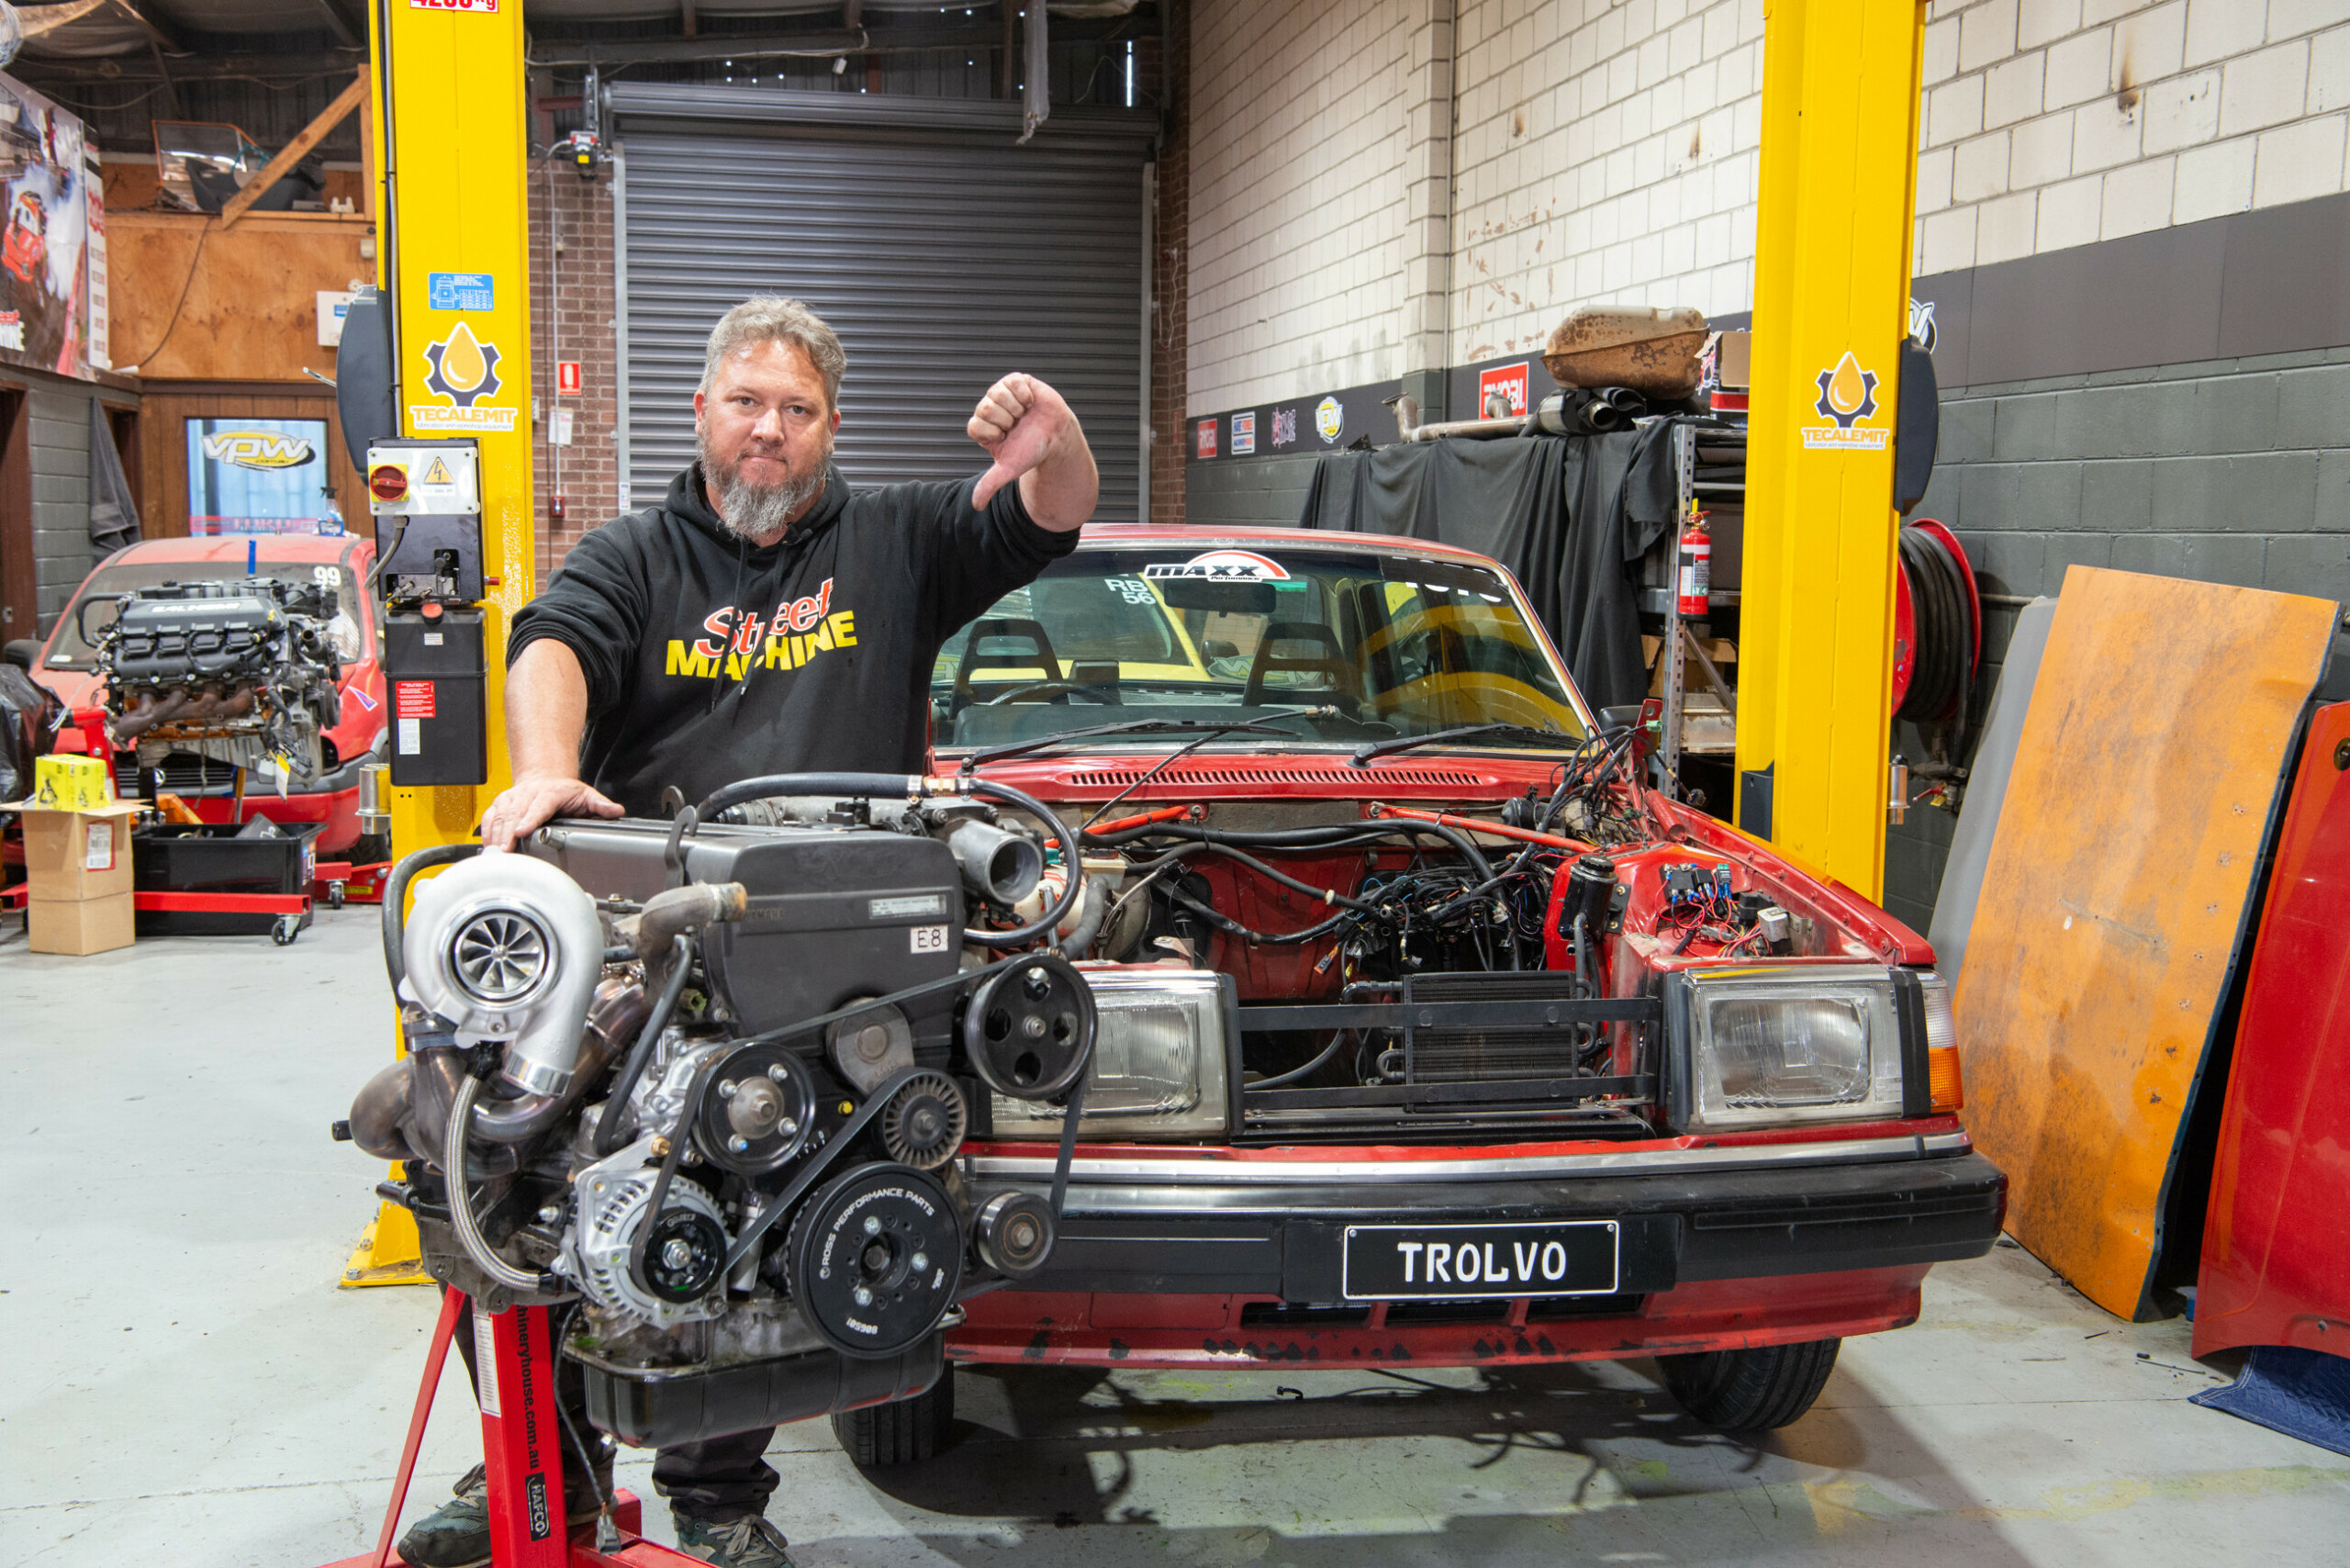 Video: We find out what went wrong with the Trolvo’s 1JZ